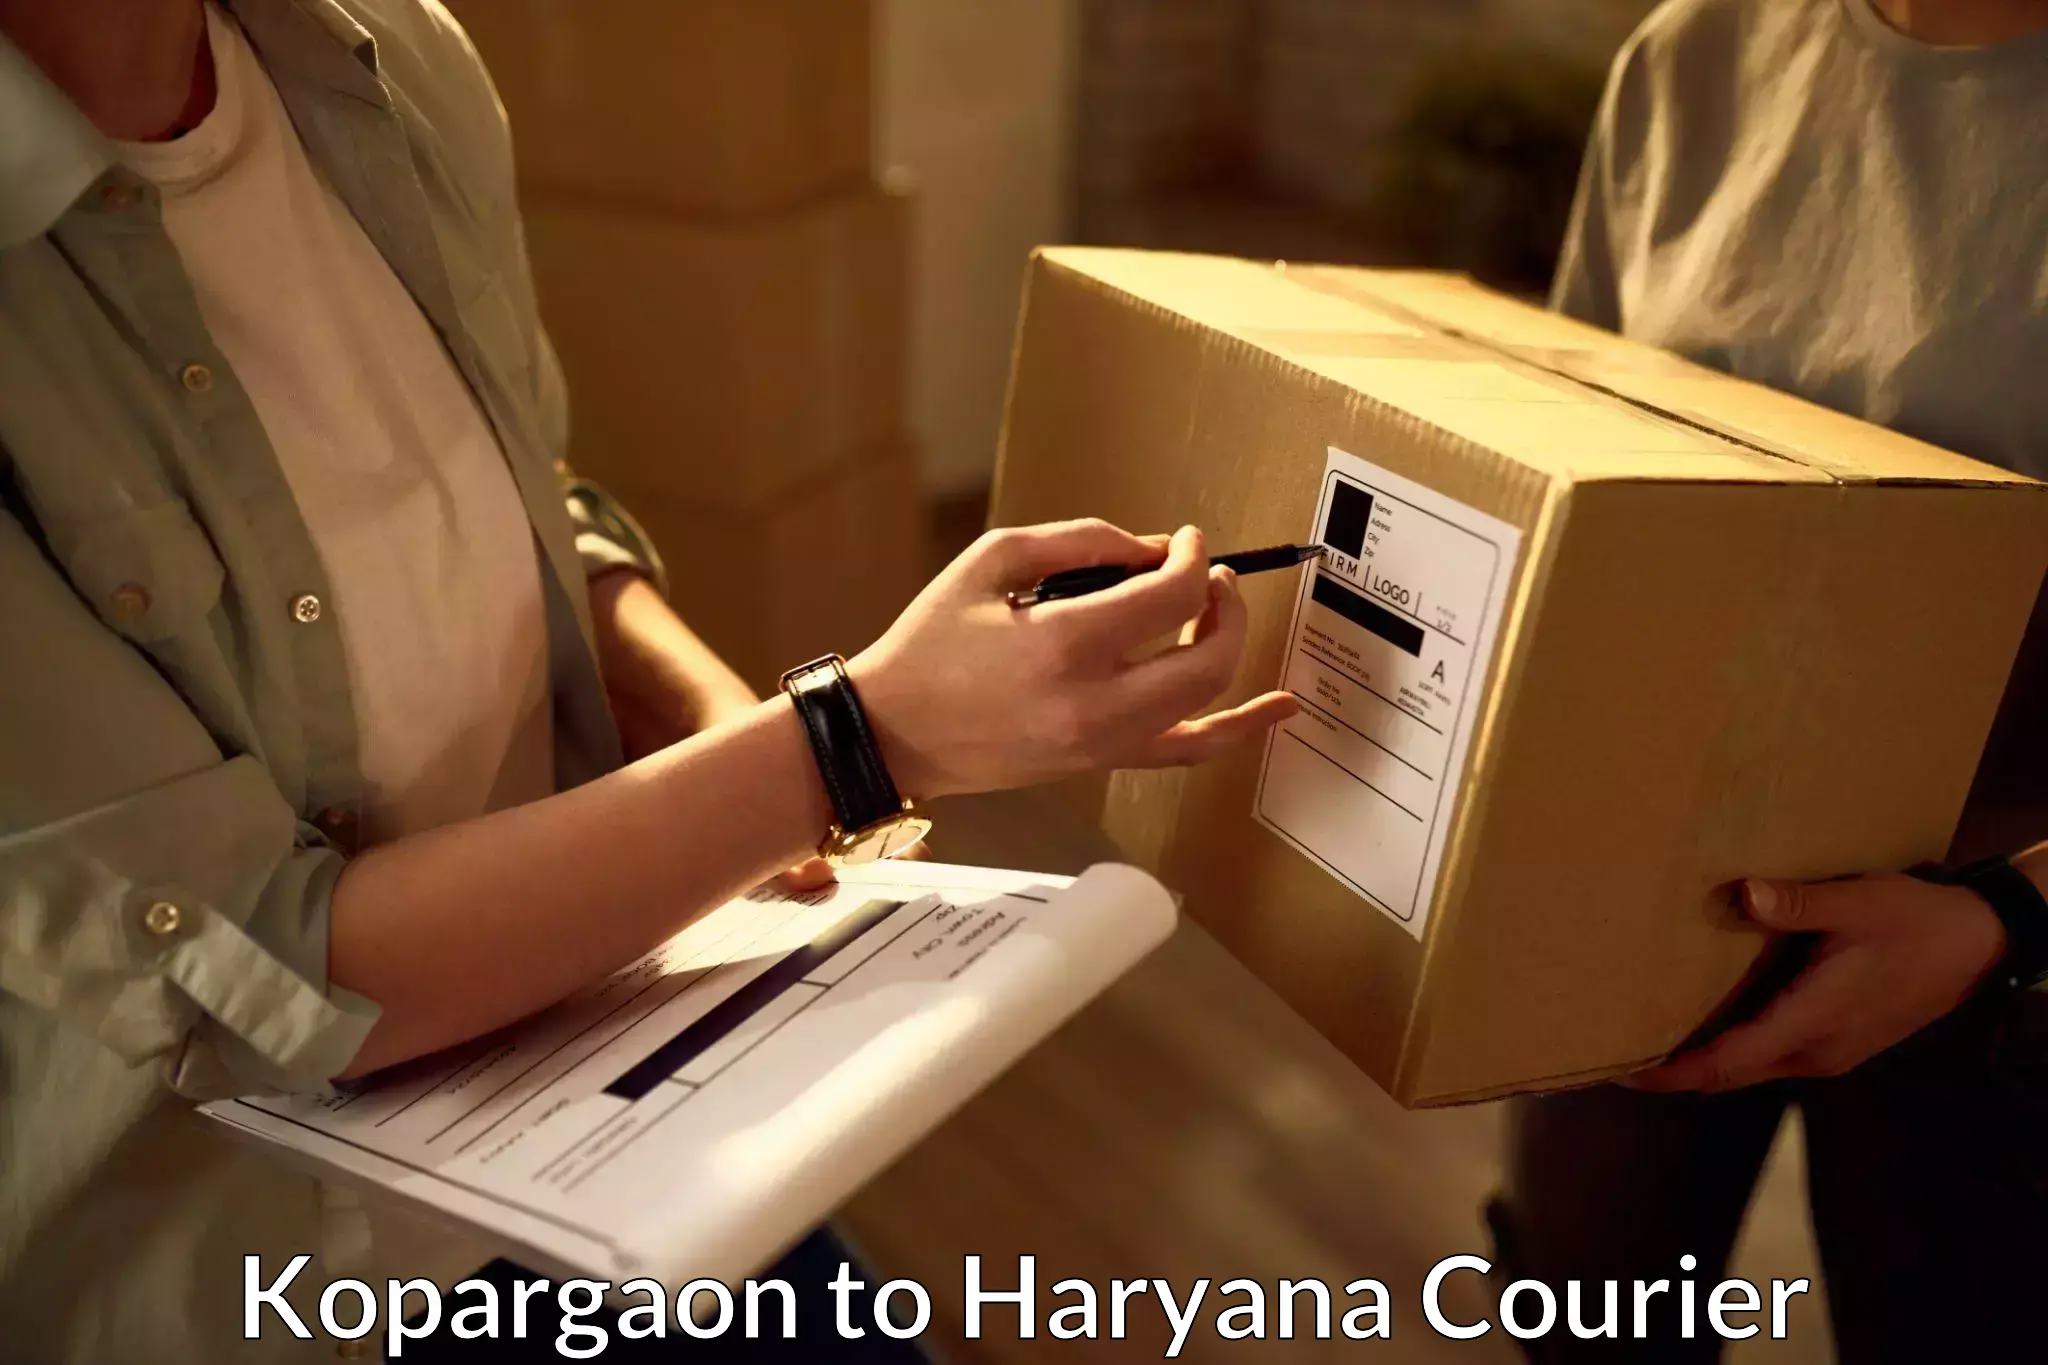 Courier service innovation Kopargaon to Fatehabad